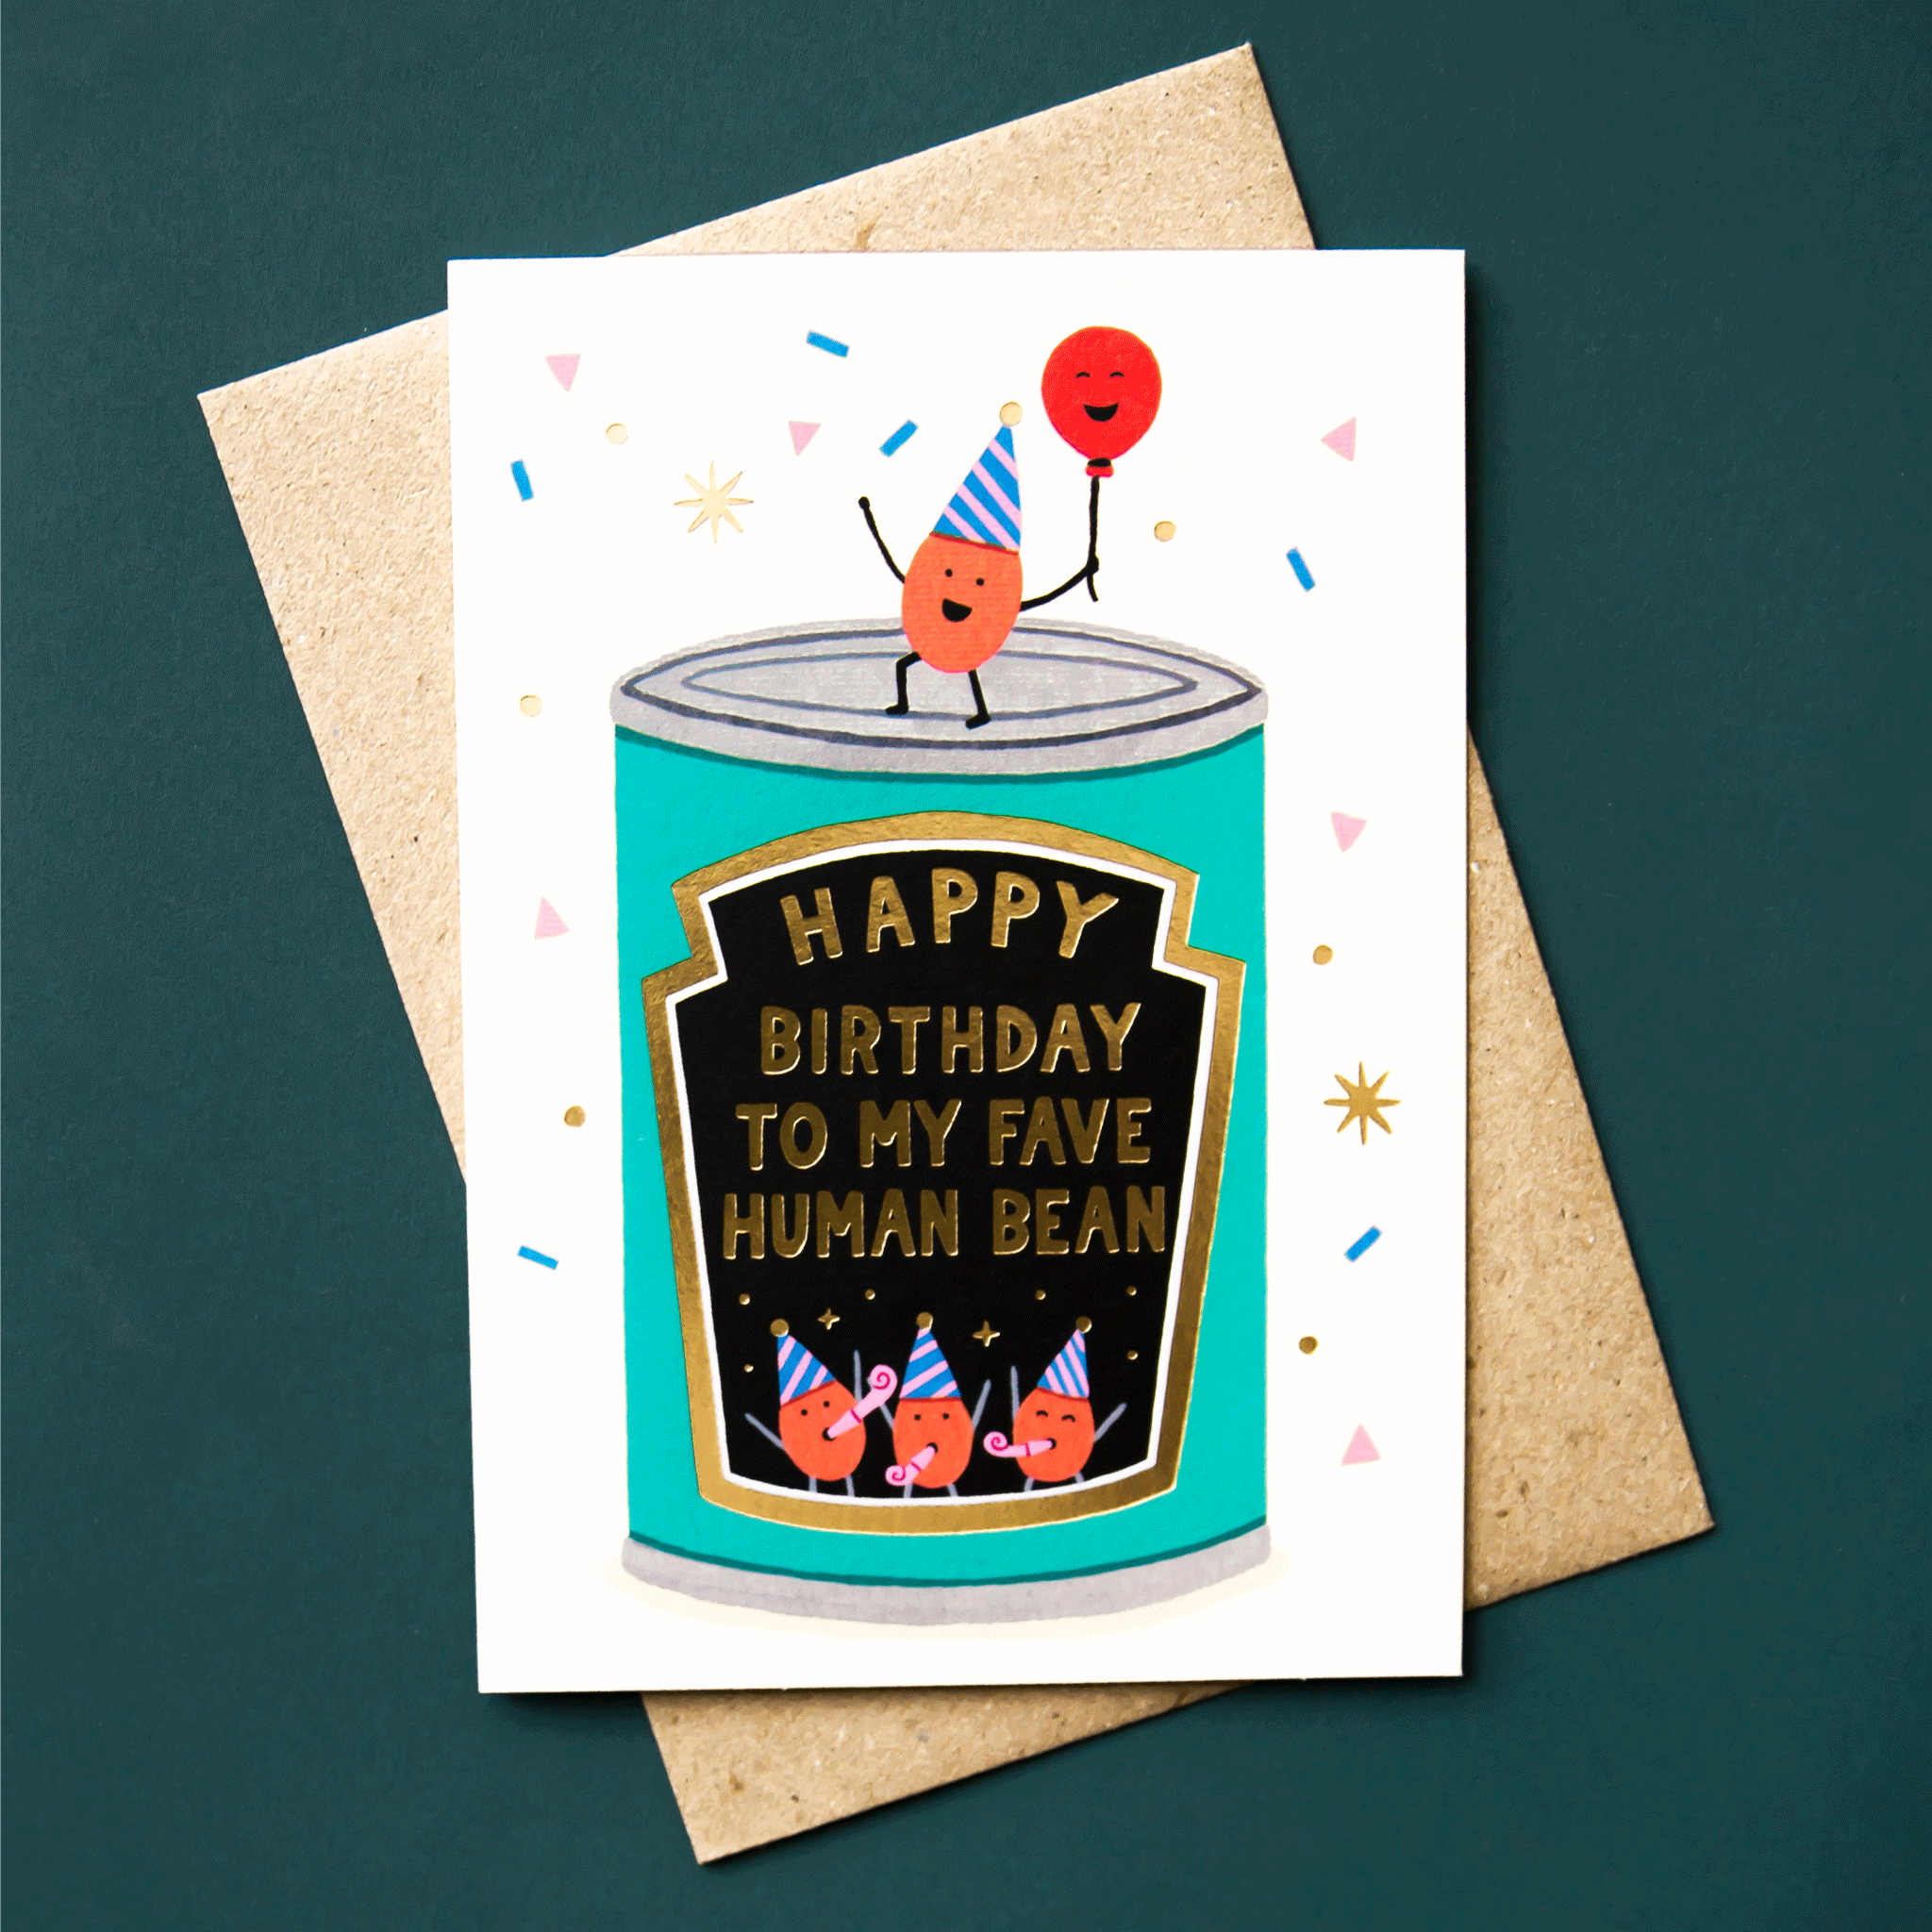 On a teal background is a white card with a graphic of a can of beans along with gold foiled text that reads, "Happy Birthday To My Fave Human Bean" and beans with smiling faces and party hats. 